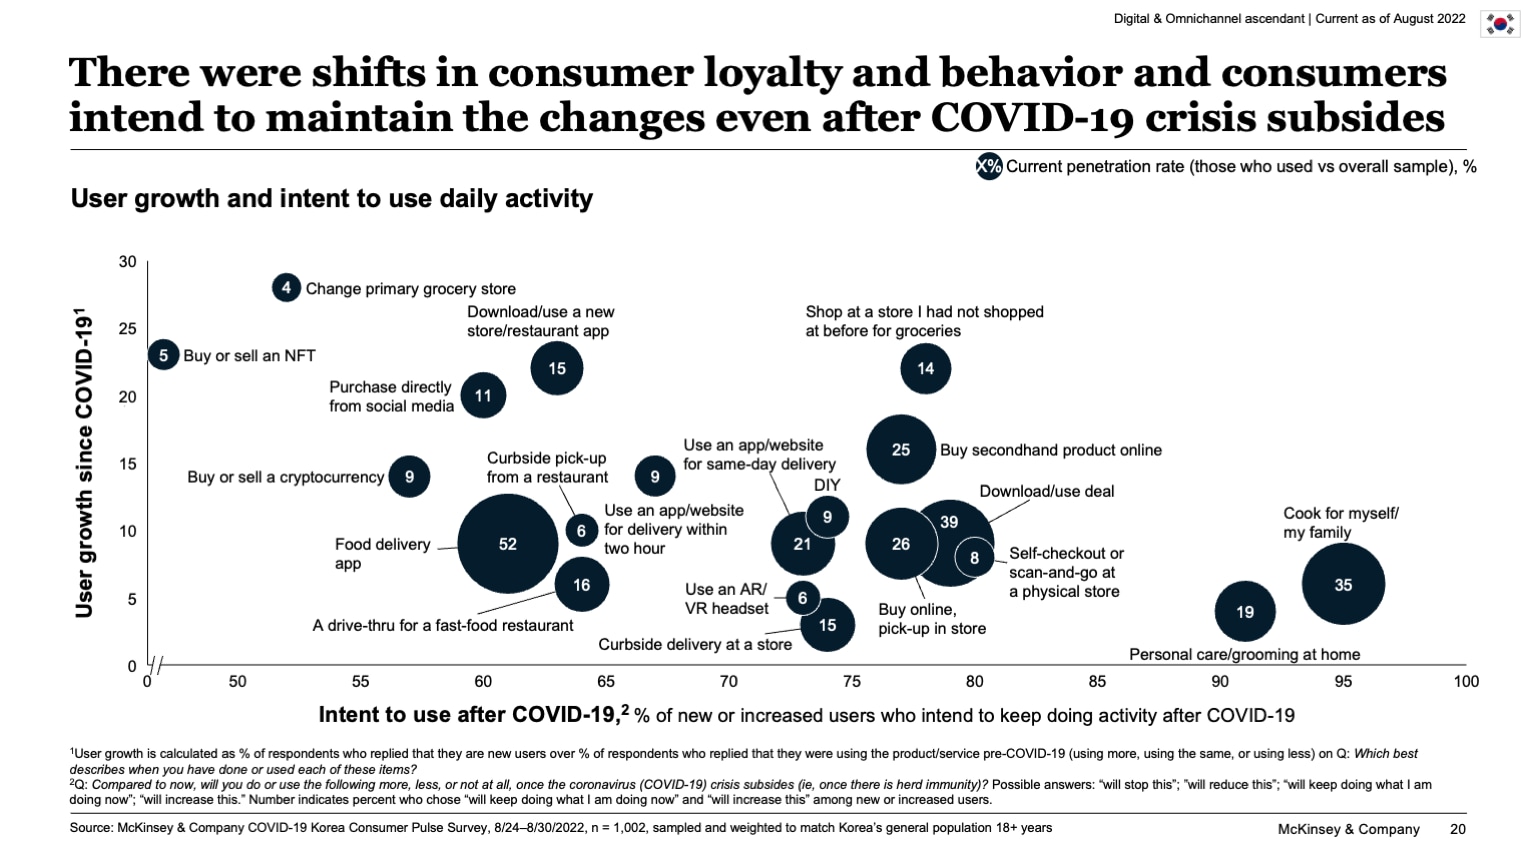 There were shifts in consumer loyalty and behavior and consumers intend to maintain the changes even after COVID-19 crisis subsides